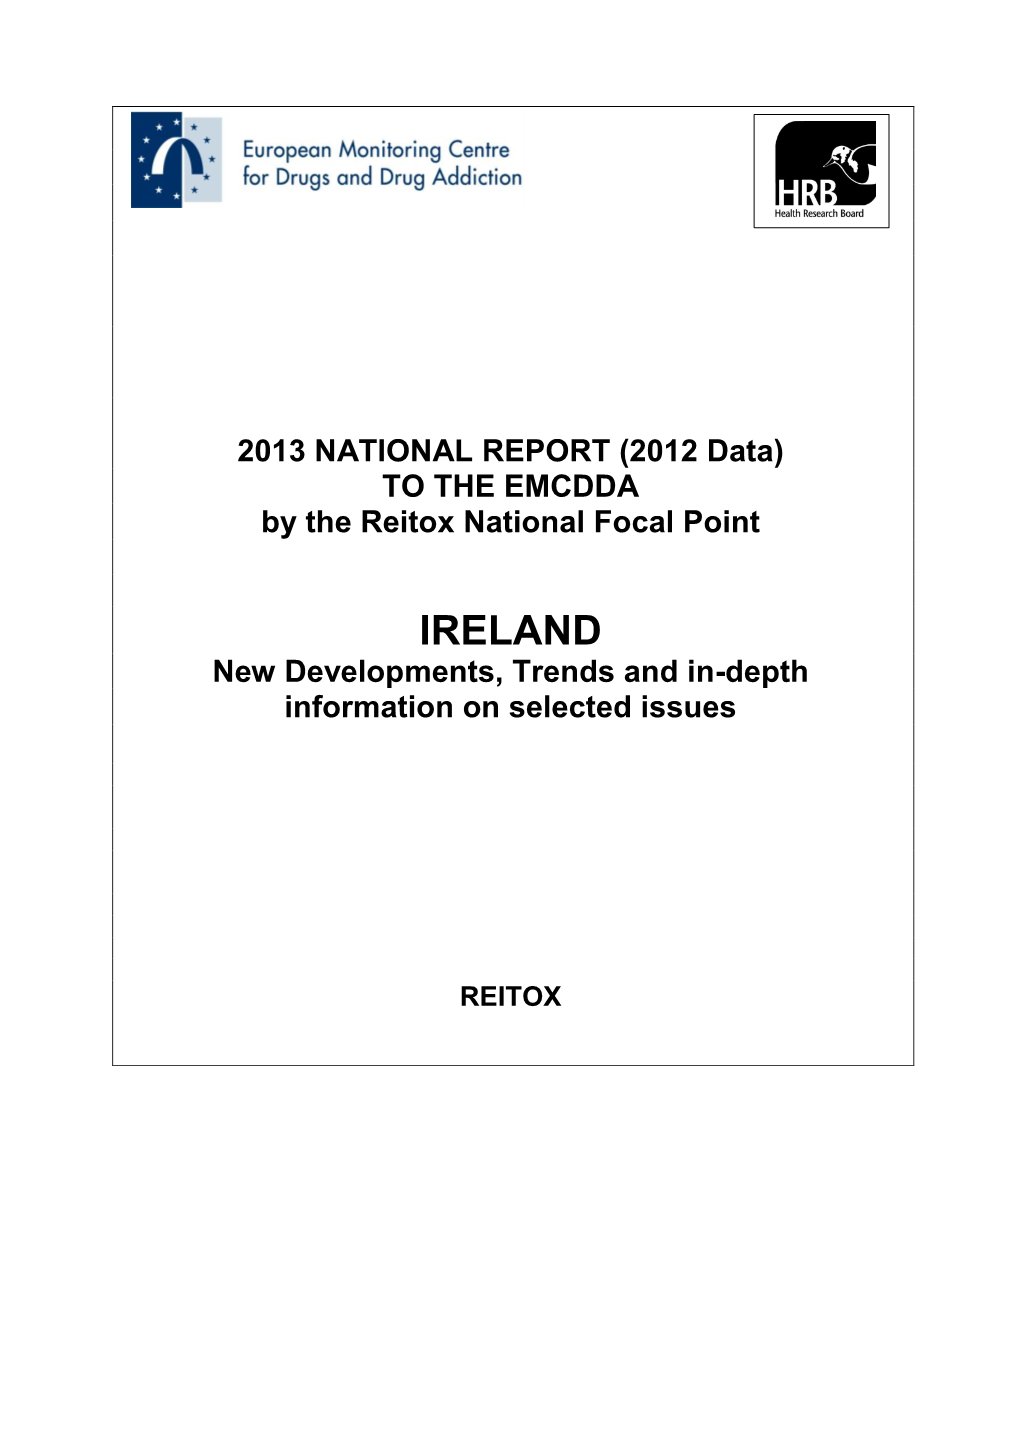 IRELAND New Developments, Trends and In-Depth Information on Selected Issues